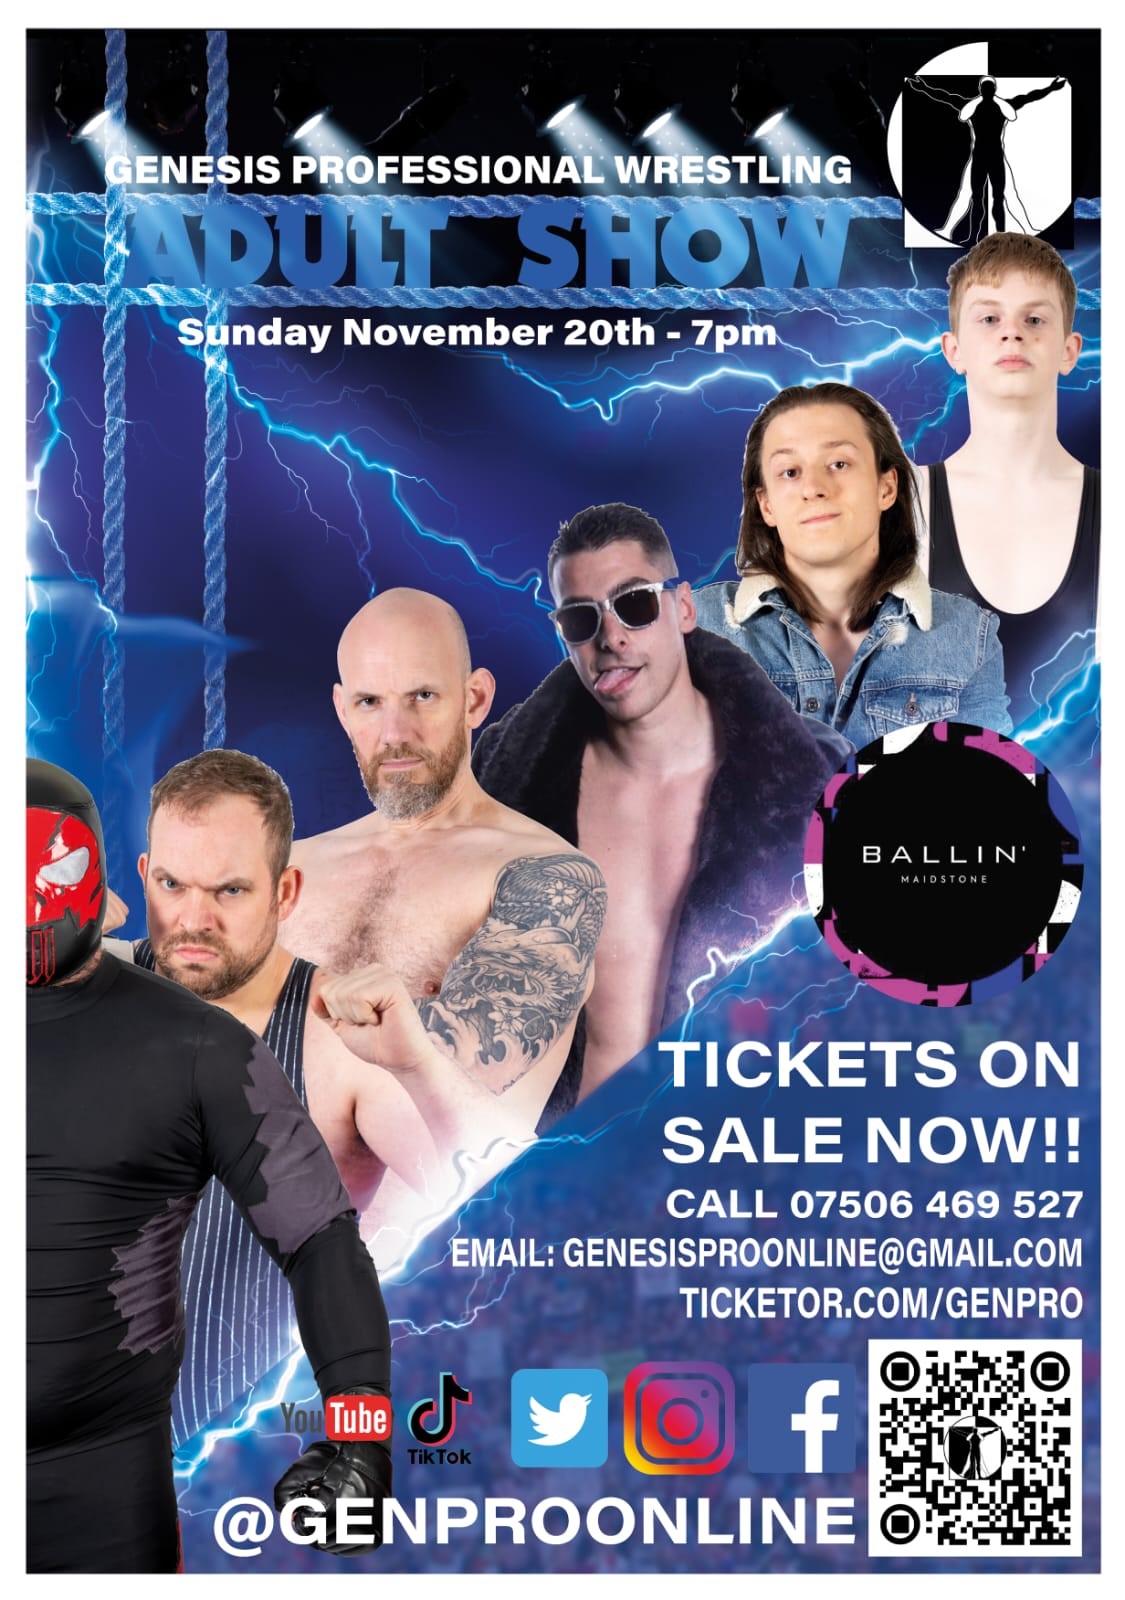 Genesis Professional Wrestling Ballin' Maidstone, Adult Show 7pm on nov. 20, 19:00@Ballin' - Pick a seat, Buy tickets and Get information on Genesis Professional Wrestling 